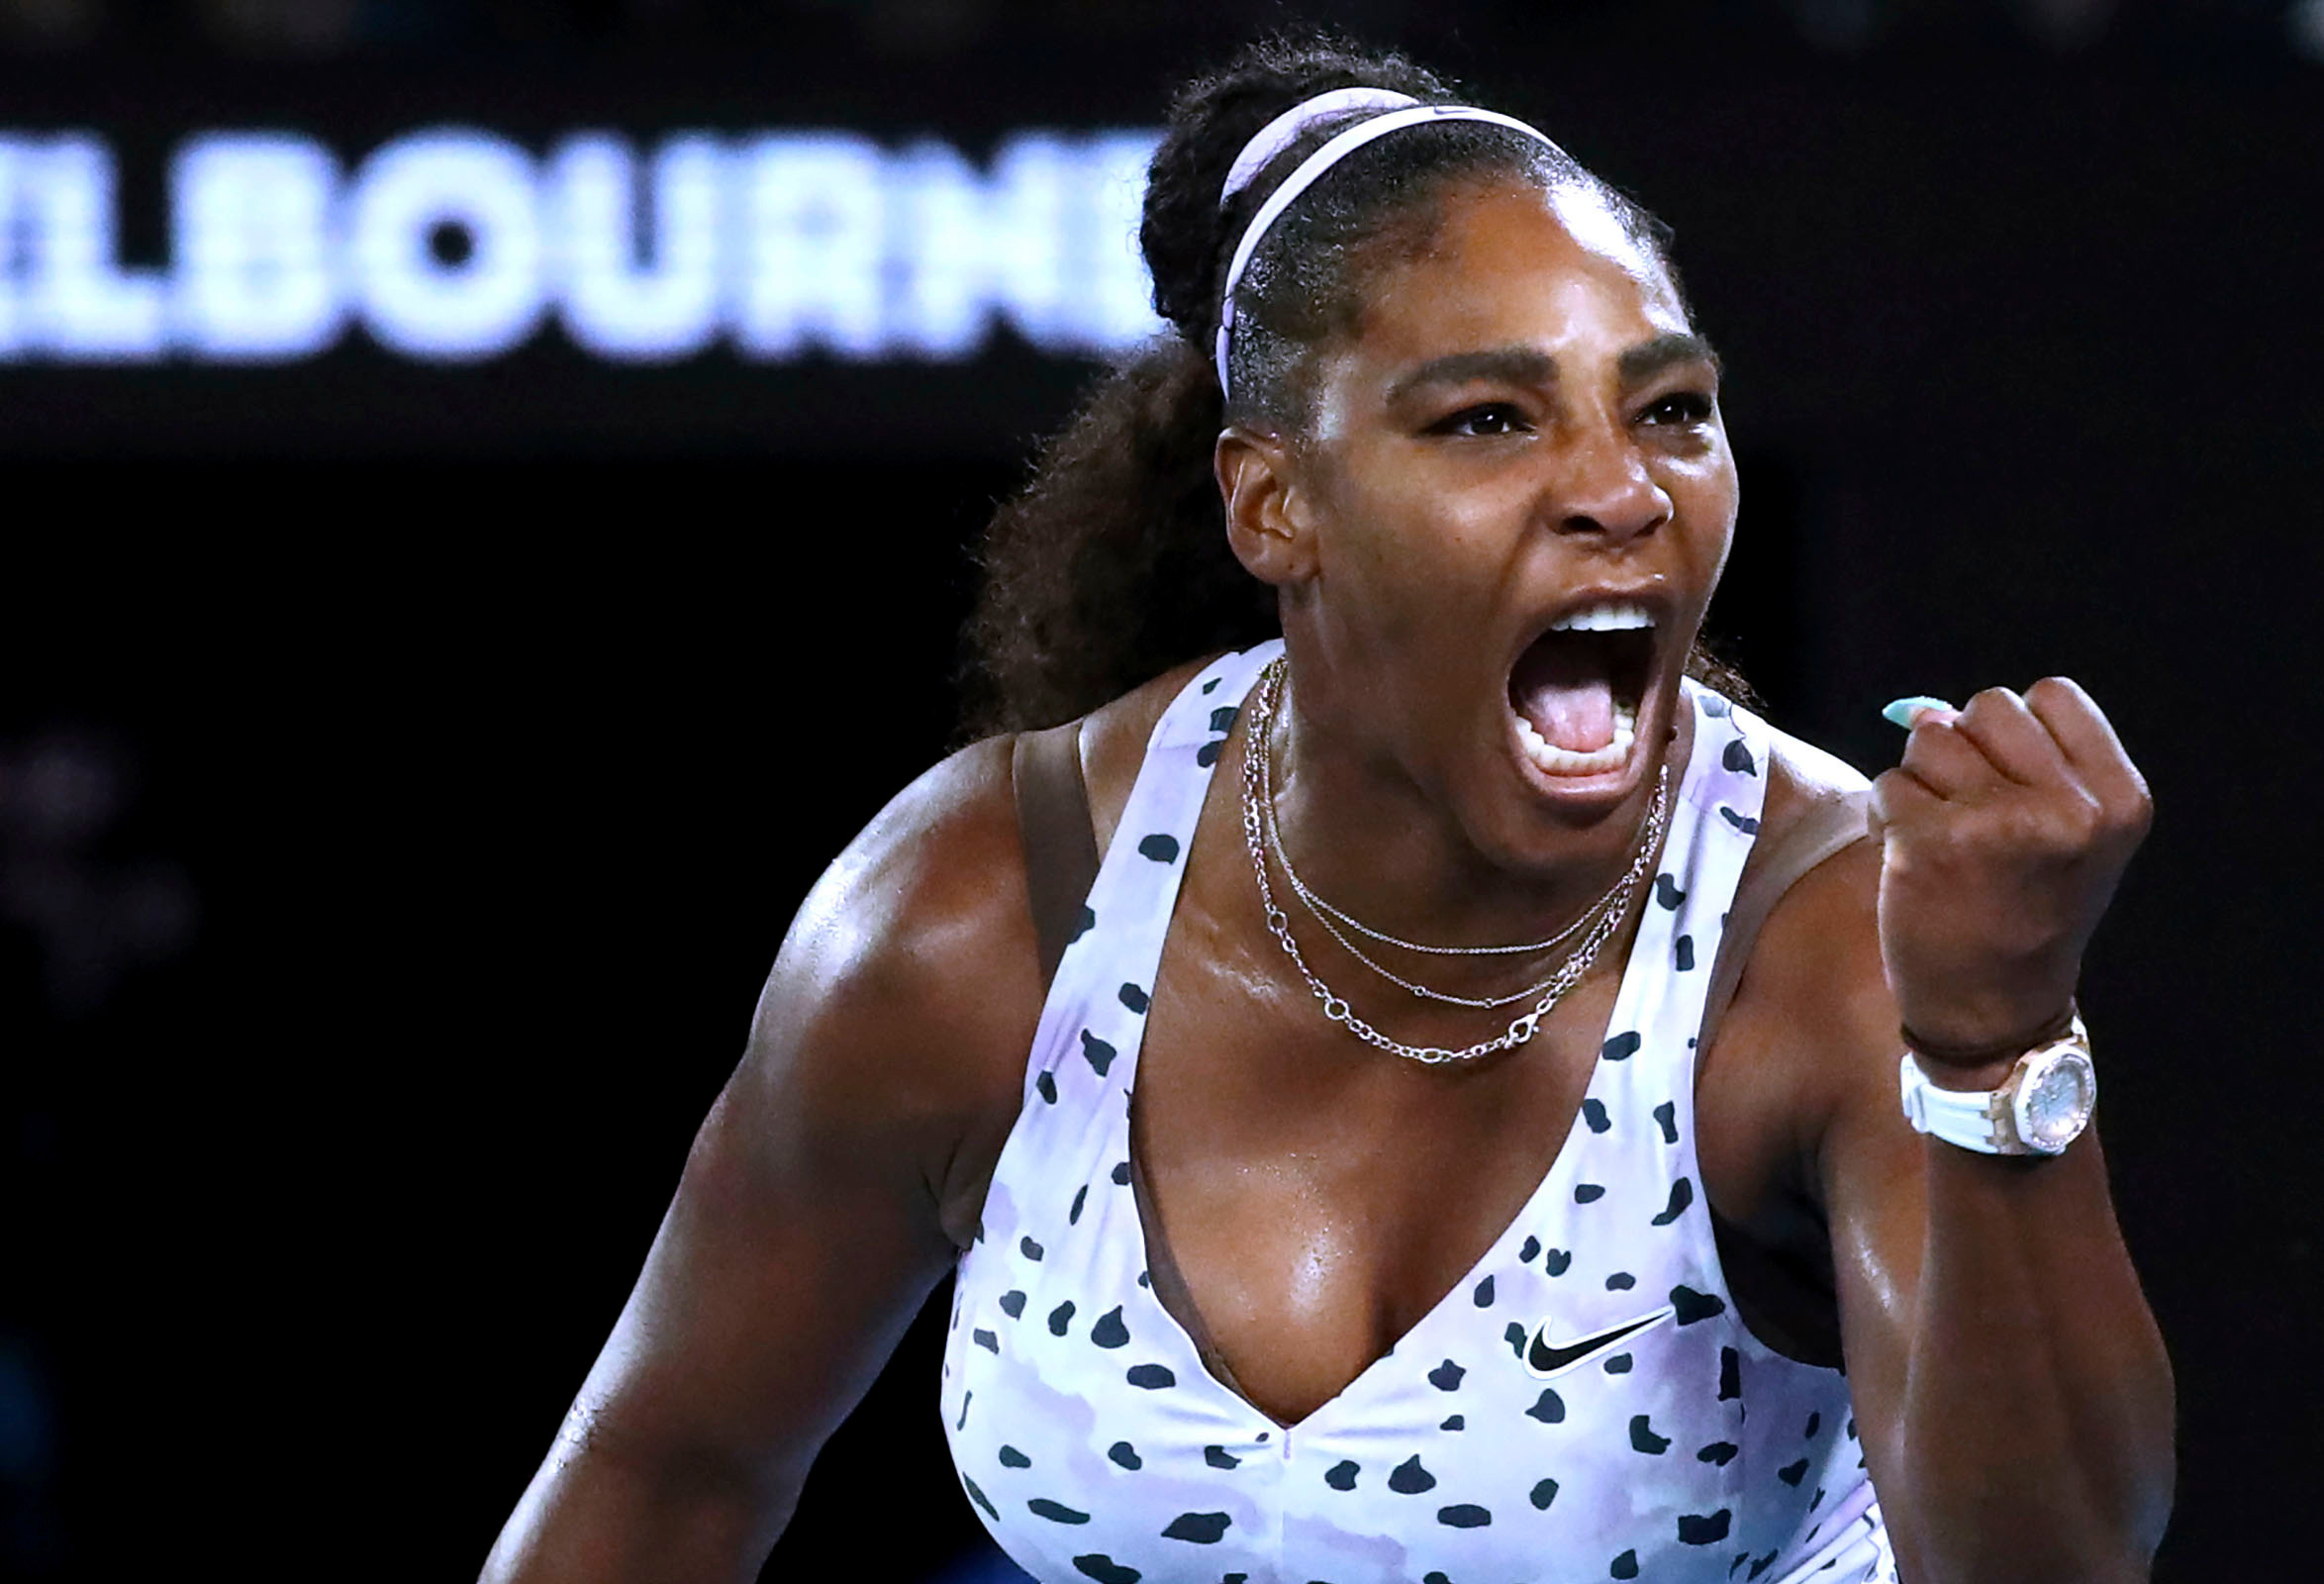 TIMELINE-Tennis-Serena Williams' journey to the top of the women's game